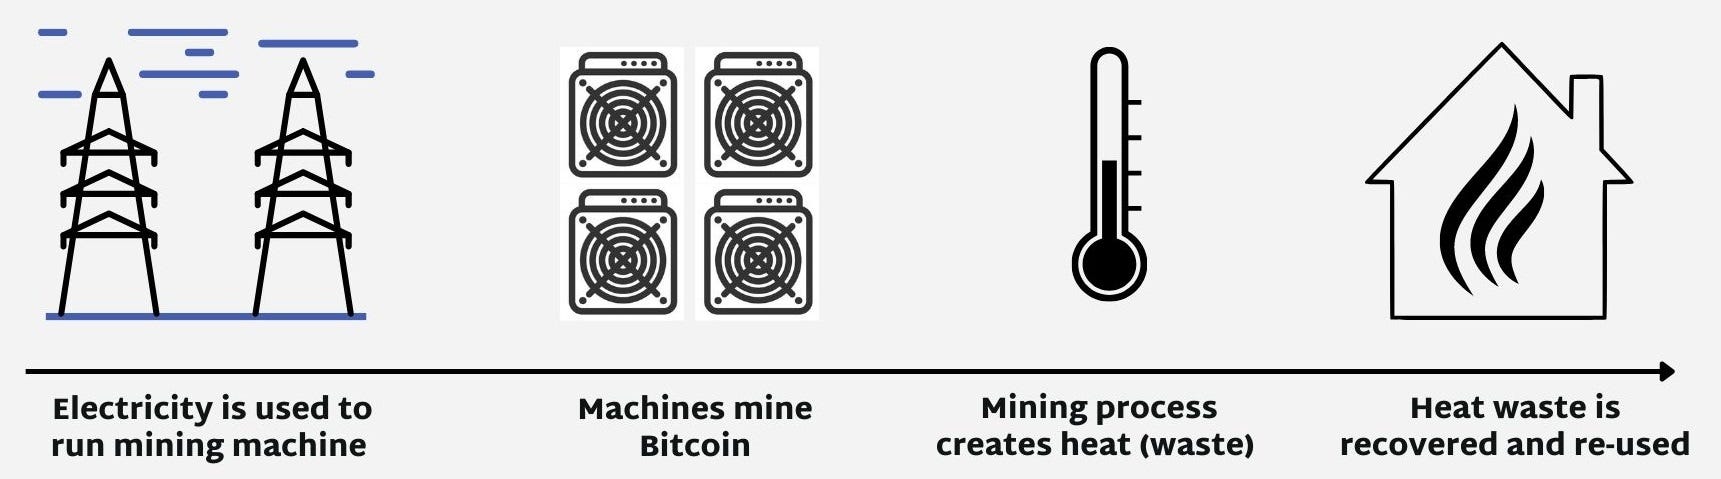 Repurposing waste heat from bitcoin mining can lower heating costs